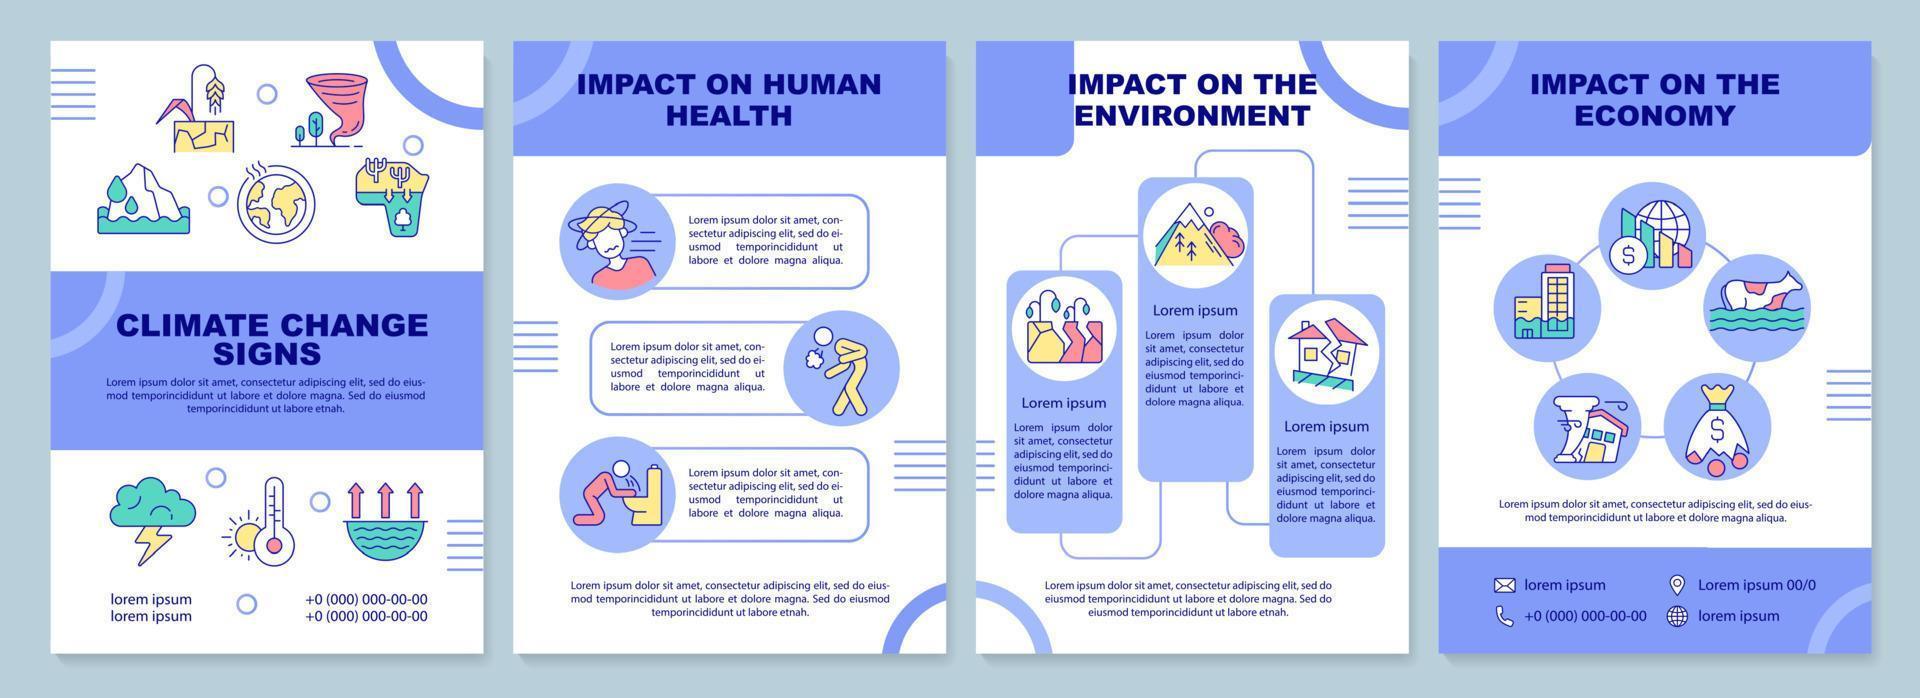 Climate change effects brochure template vector